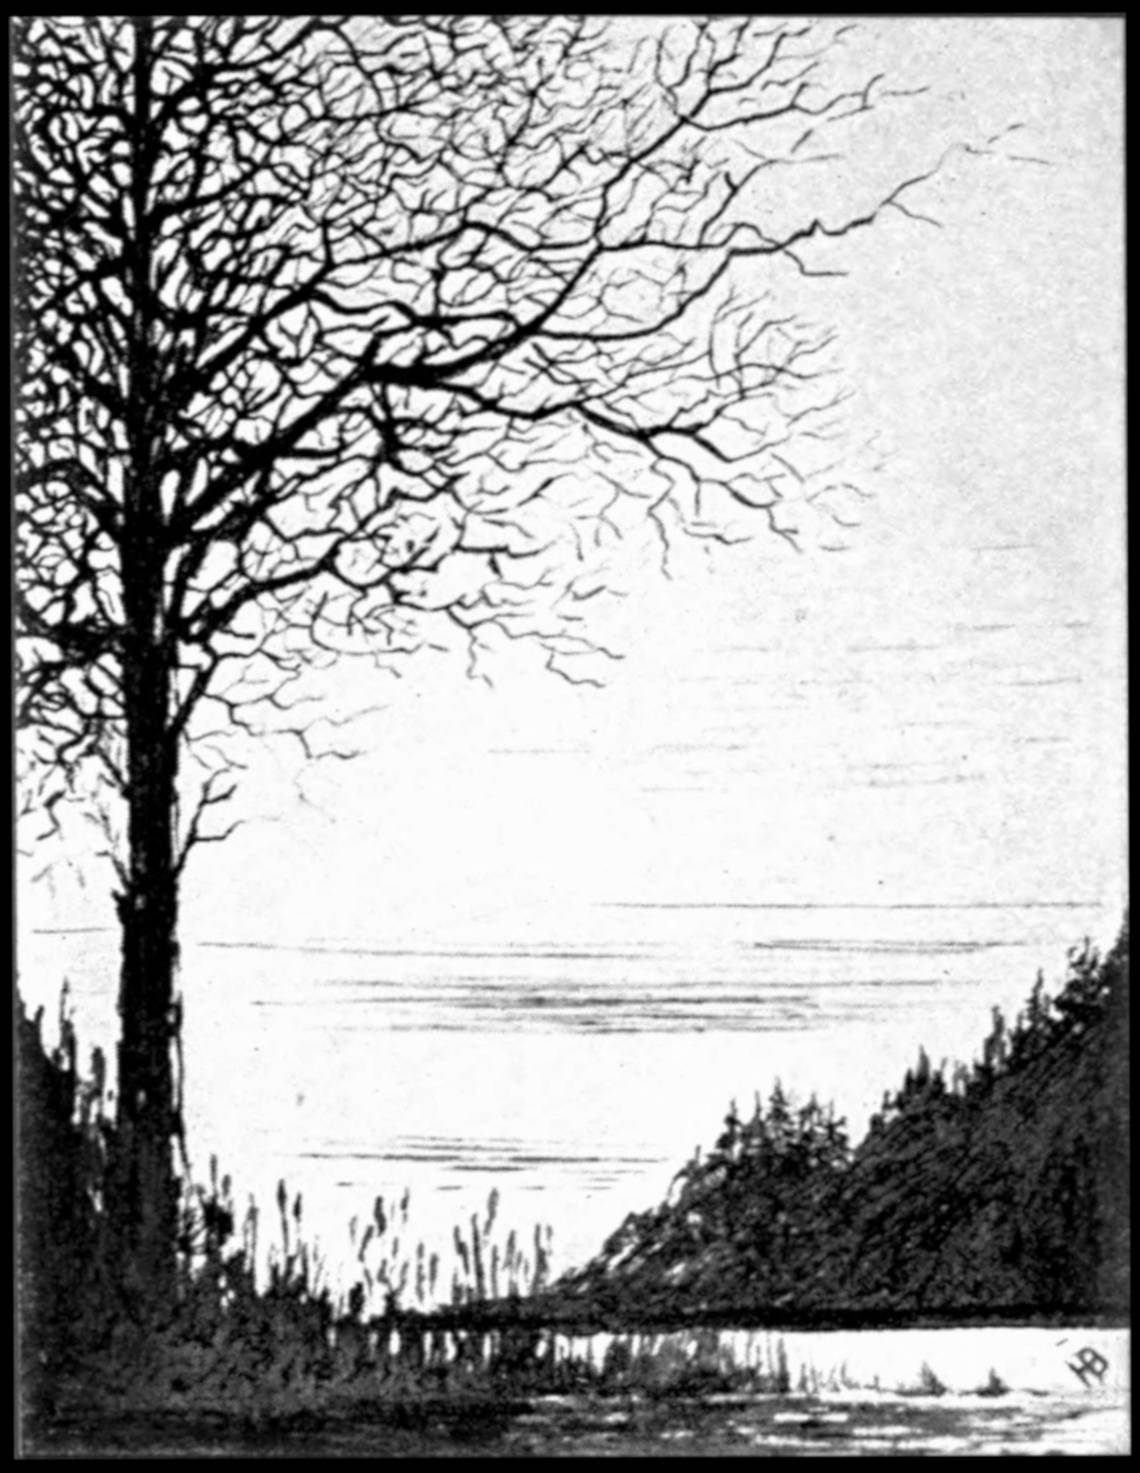 Grayscale sketch of a landscape with a single tree without leaves in the left foreground, at the shore of a body of water. A rough forest is in the distance to the right. Small lines of fog or clouds are in the background.